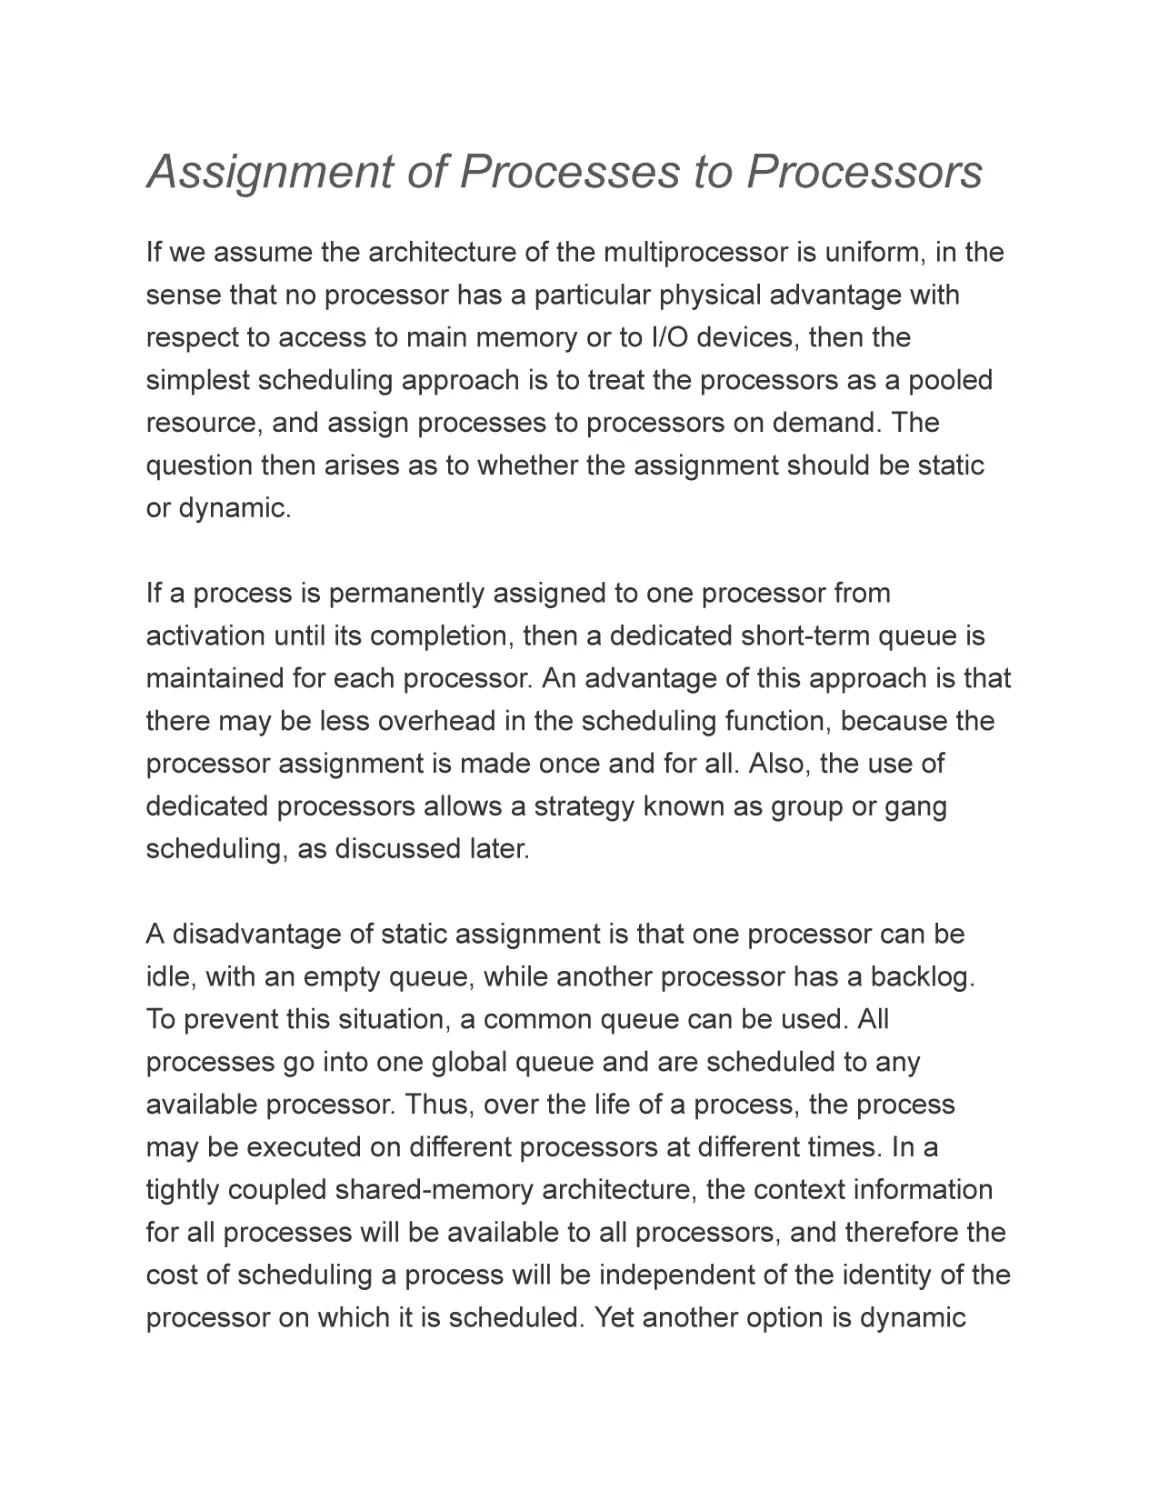 Assignment of Processes to Processors